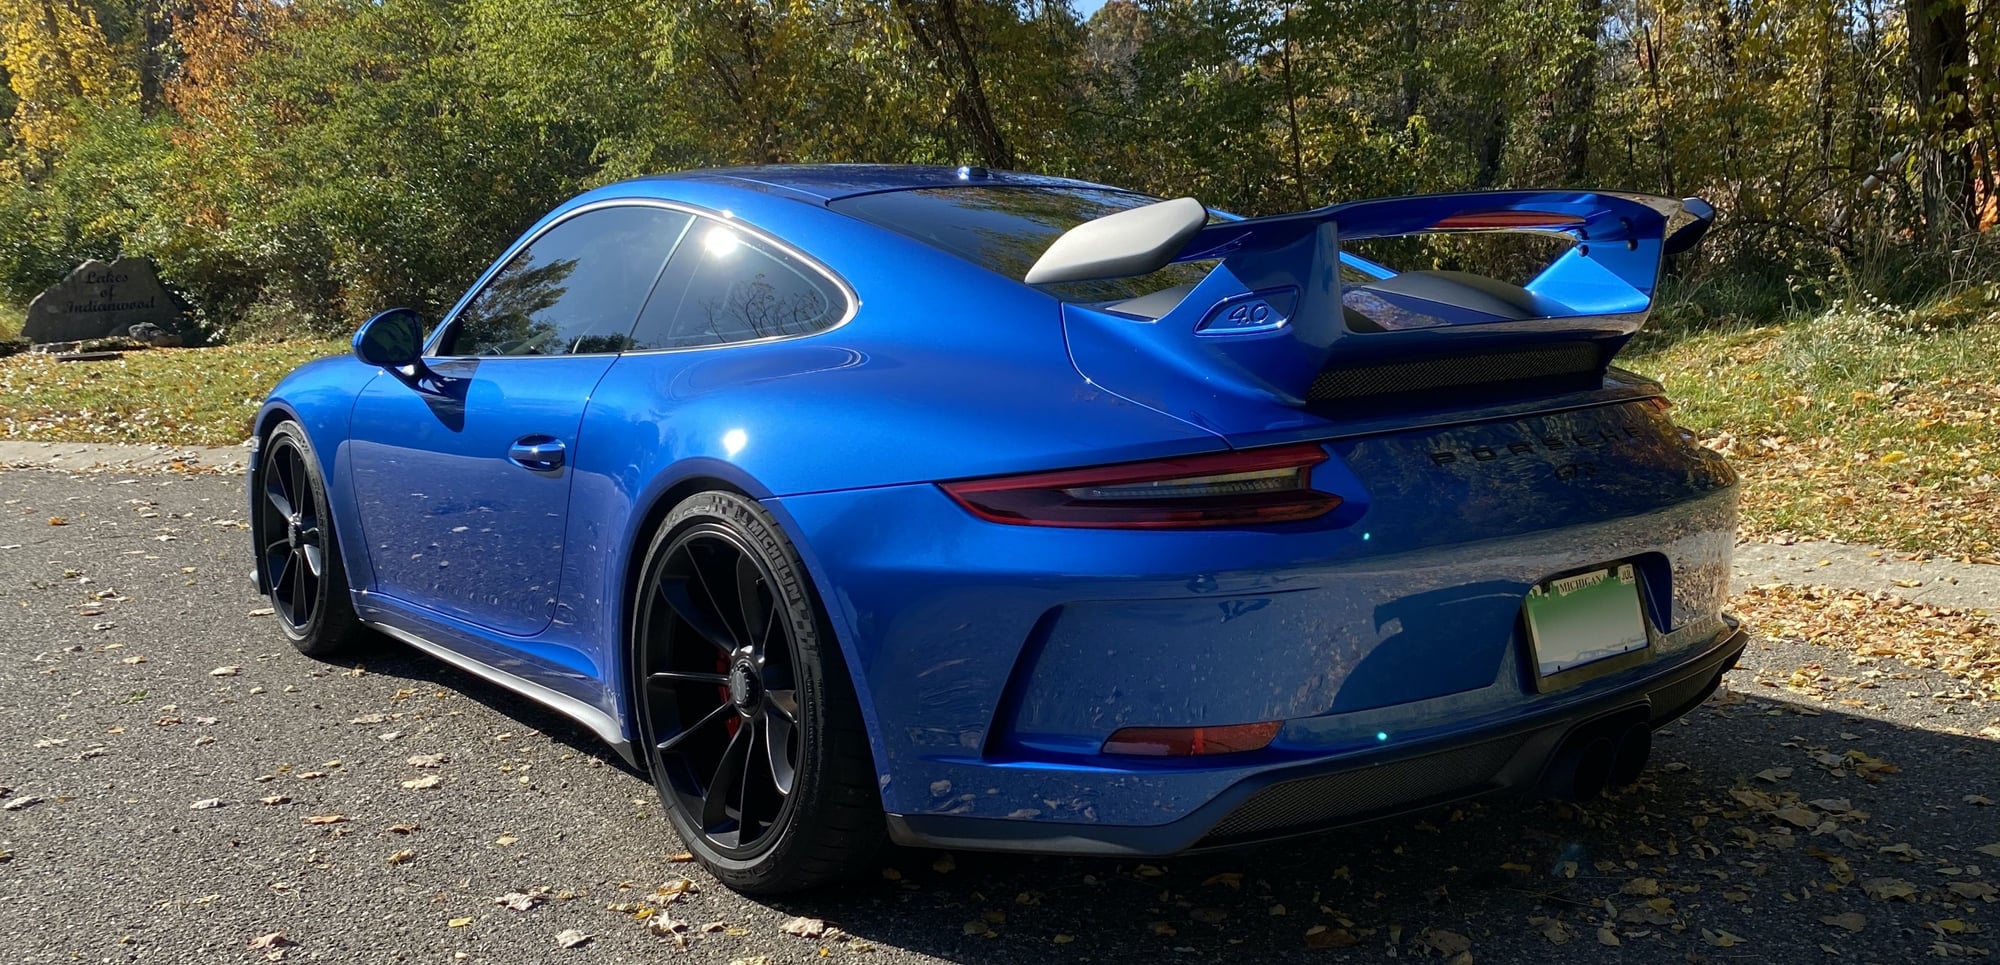 2018 Porsche GT3 - Saphirre Blue 991.2 GT3 (manual) - Used - VIN WP0AC2A93JS175837 - 13,800 Miles - 6 cyl - 2WD - Manual - Coupe - Blue - Oxford, MI 48371, United States